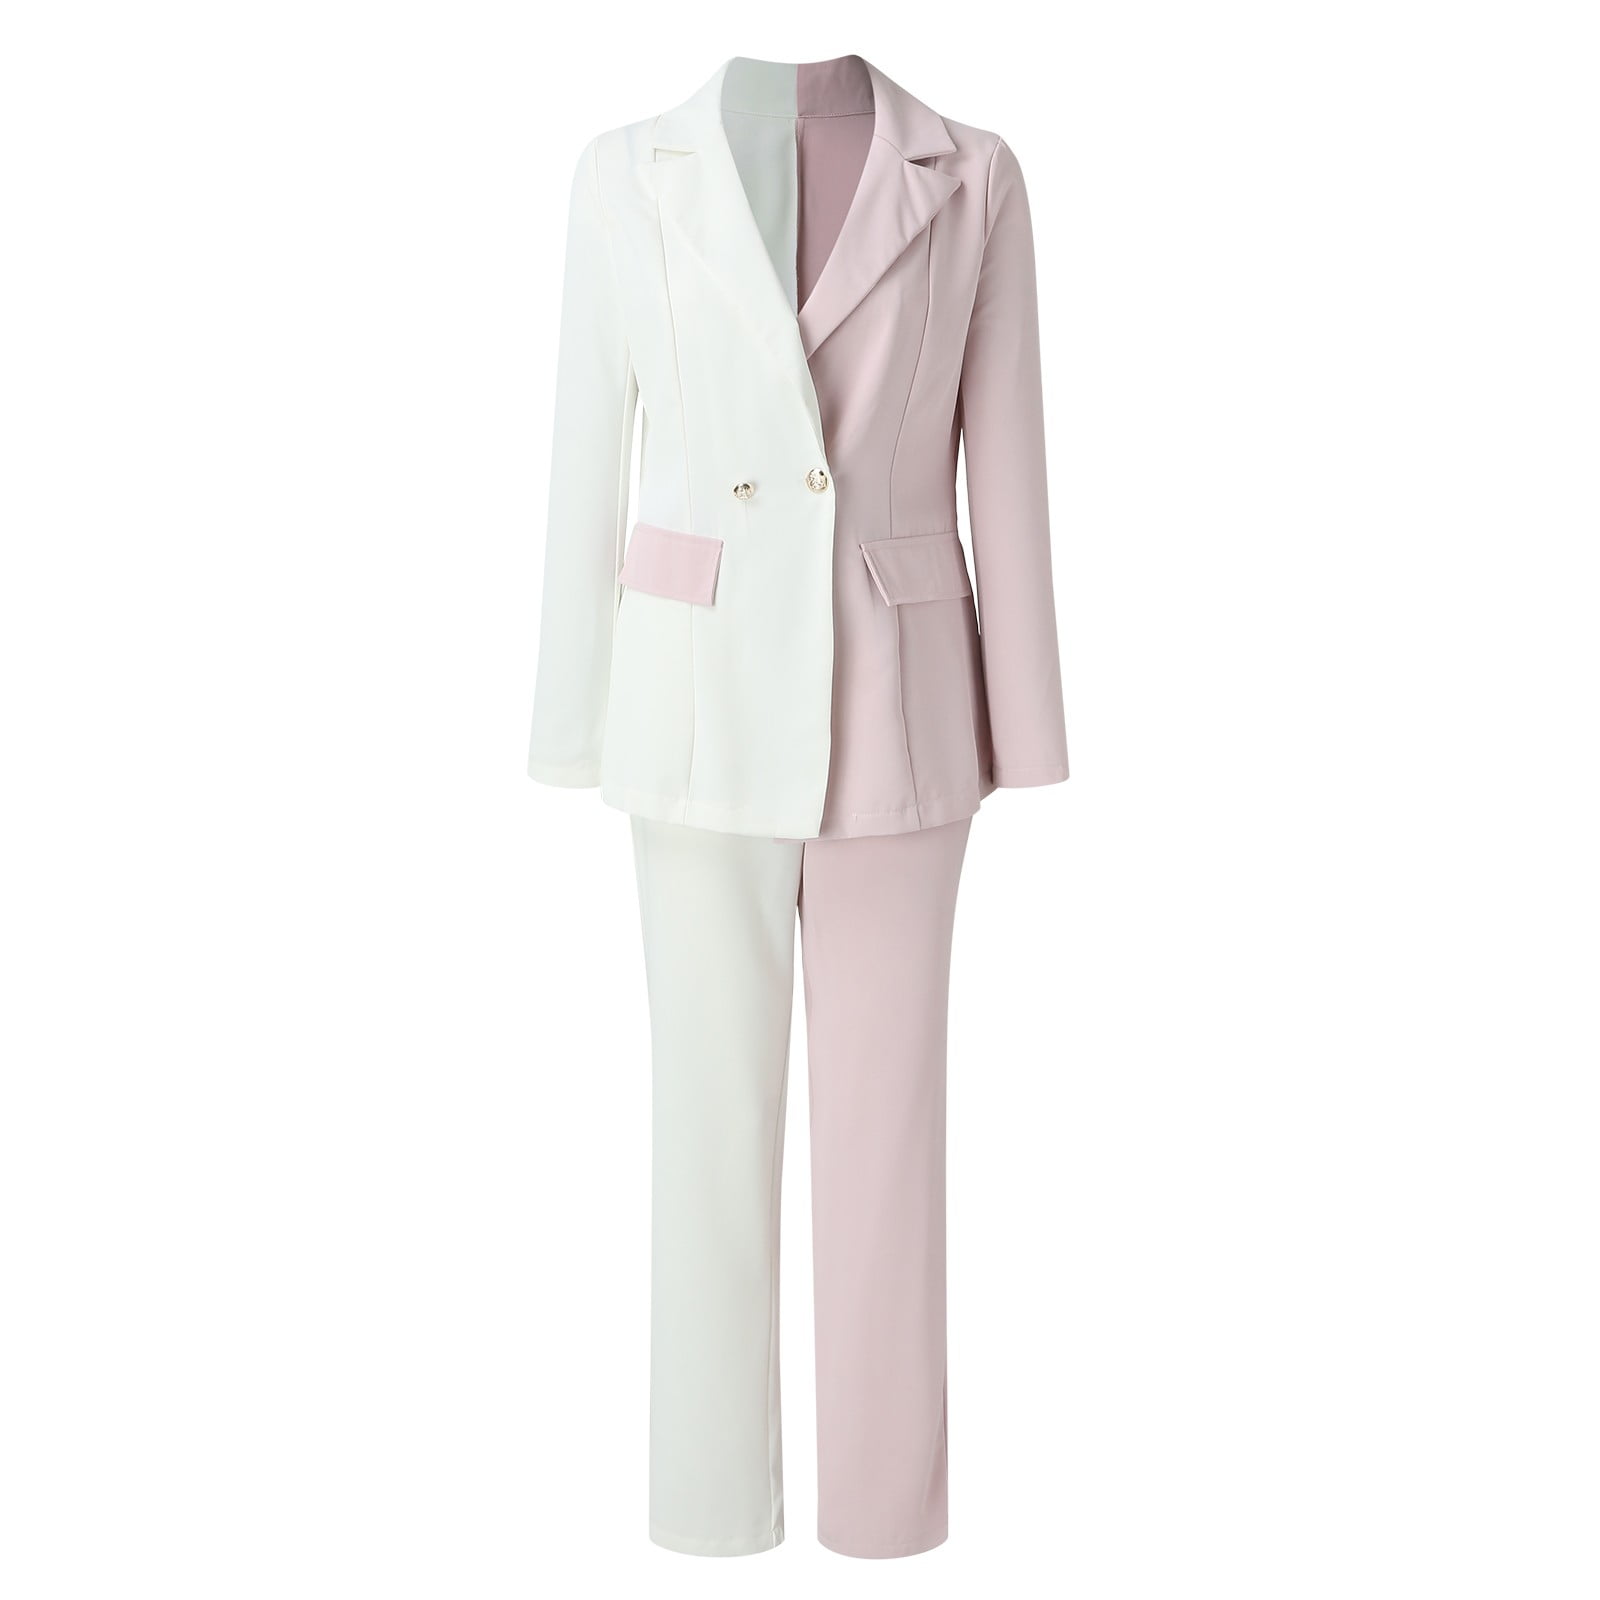 NKOOGH Pant Suits for Women Dressy Wedding Guest With Elastic Waist Two  Piece for Women Pants Suit Women Fashion Casual Clothes Long Sleeve  Assorted Colors Blazer High Waist Suit Pencil Pants Women Ca 